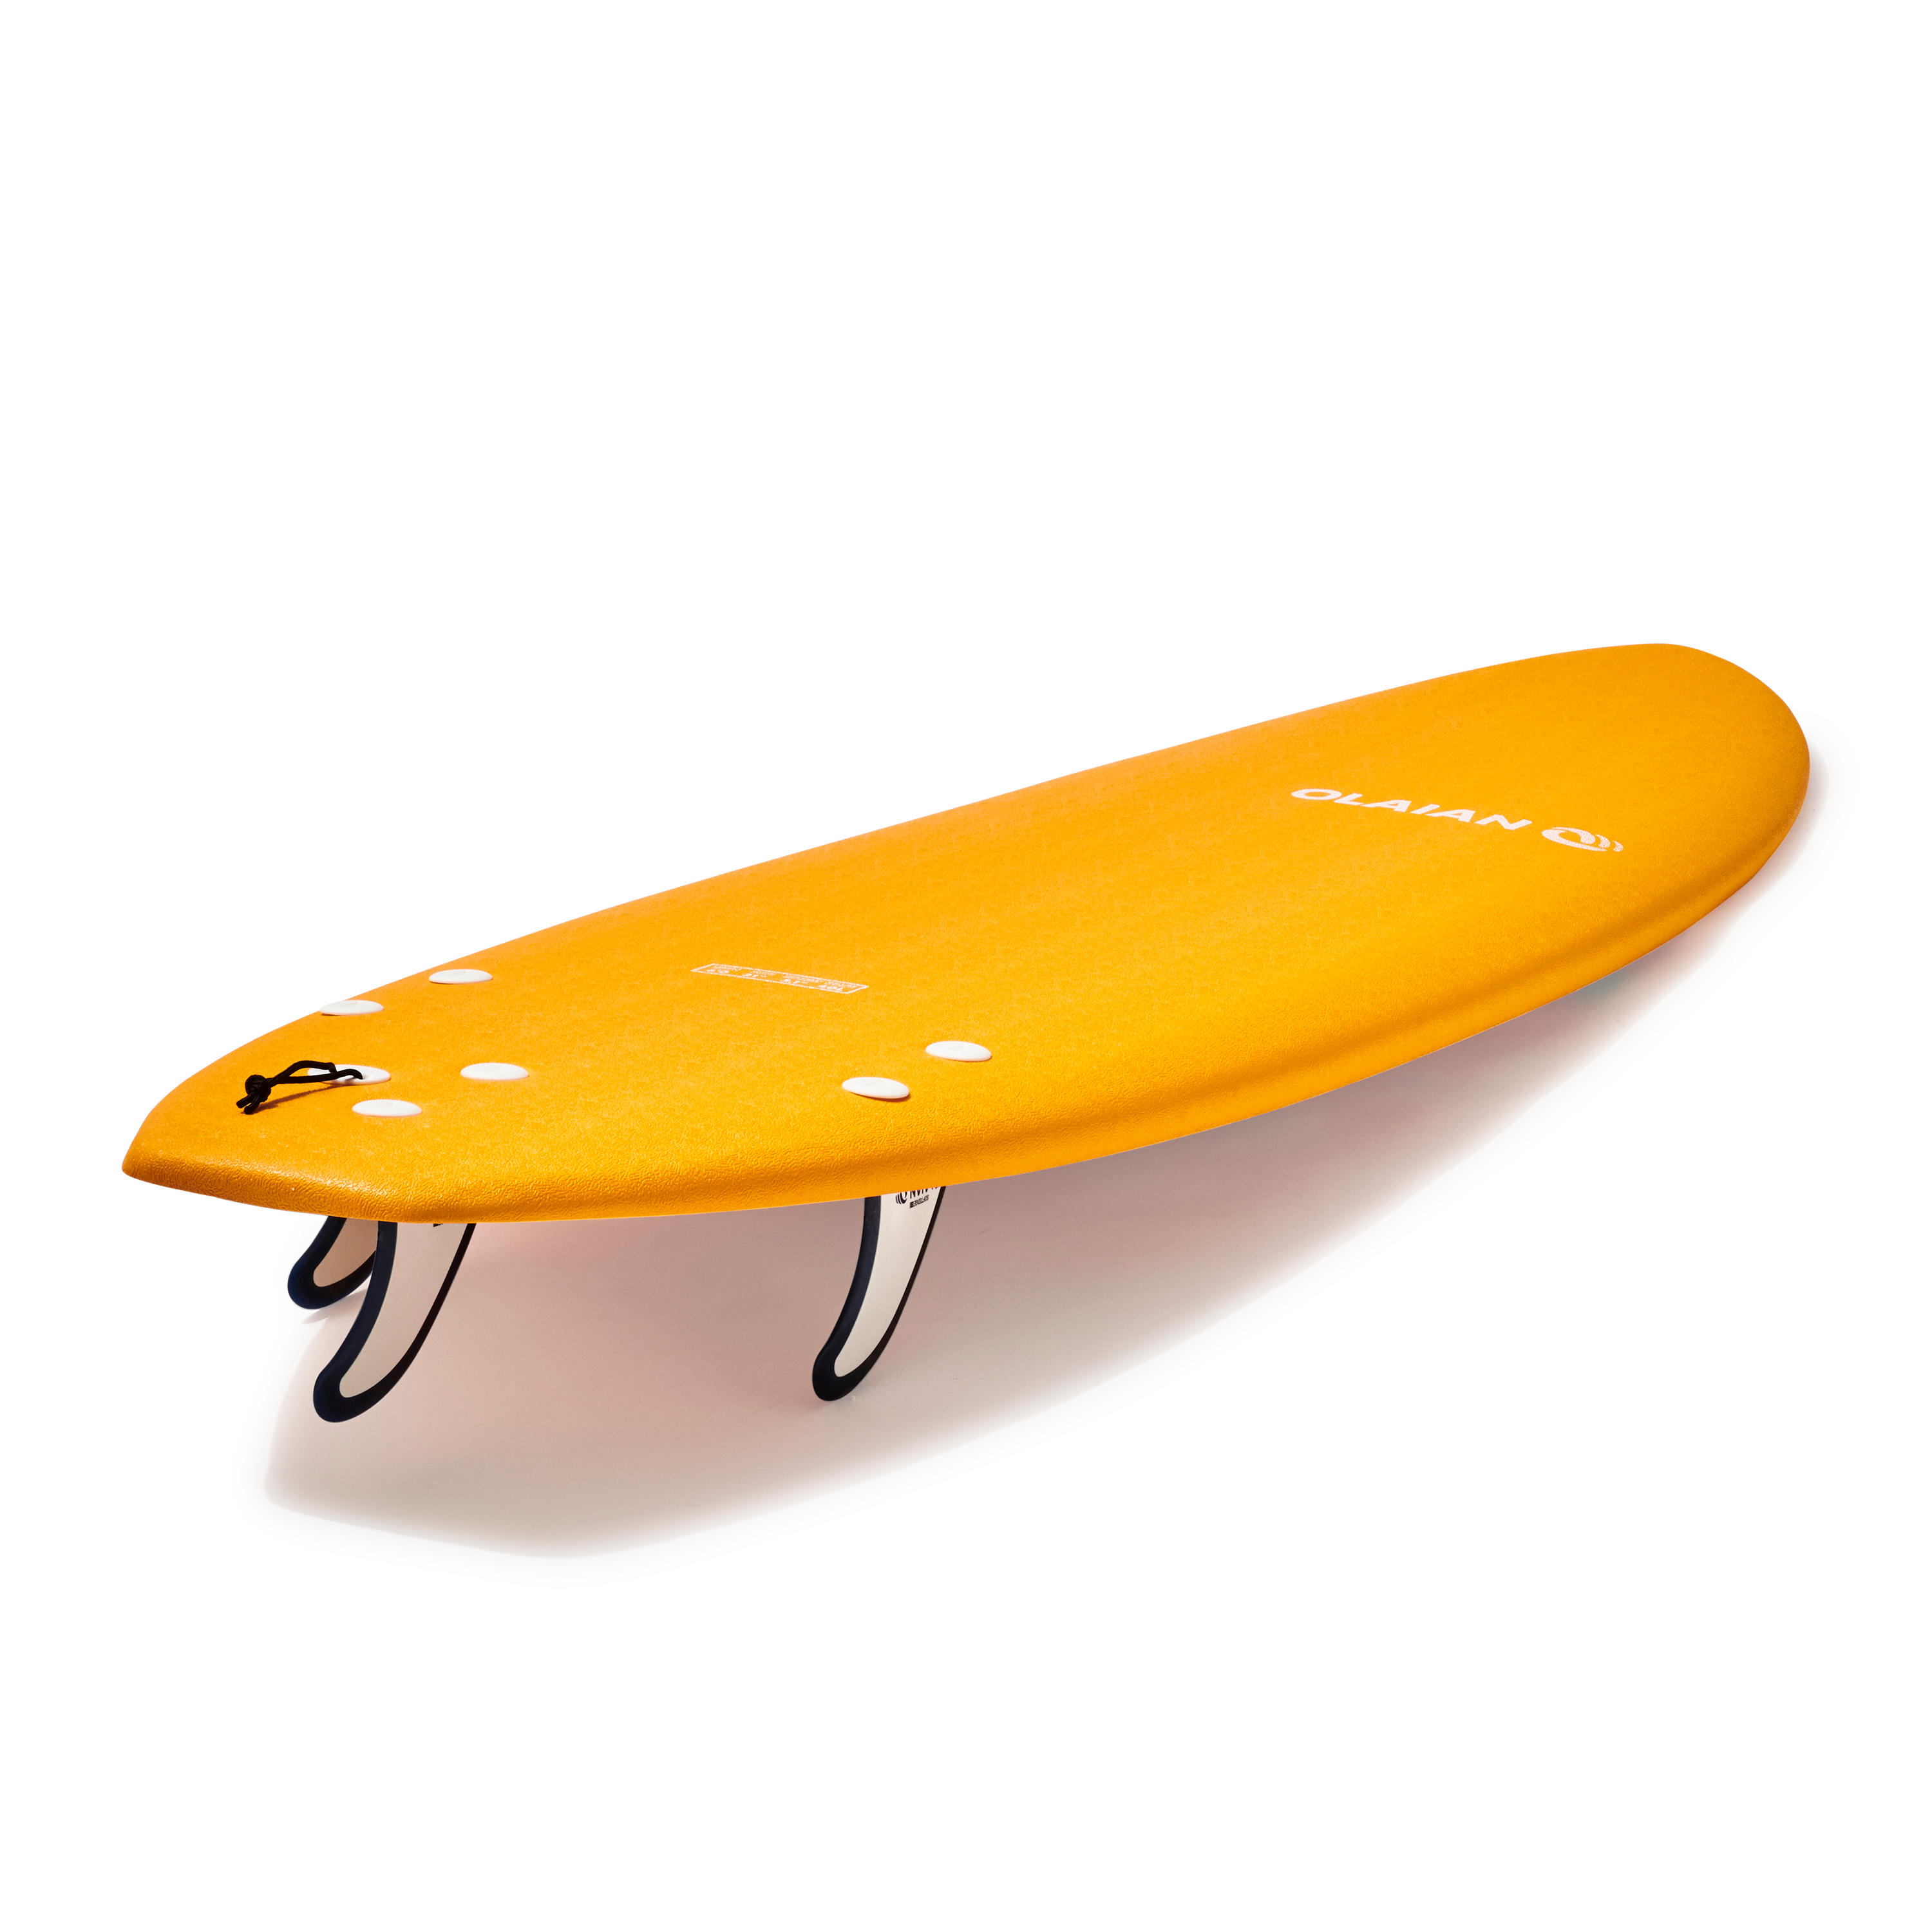 FOAM SURFBOARD 500 6'. Supplied with 1 leash and 3 fins. 5/13